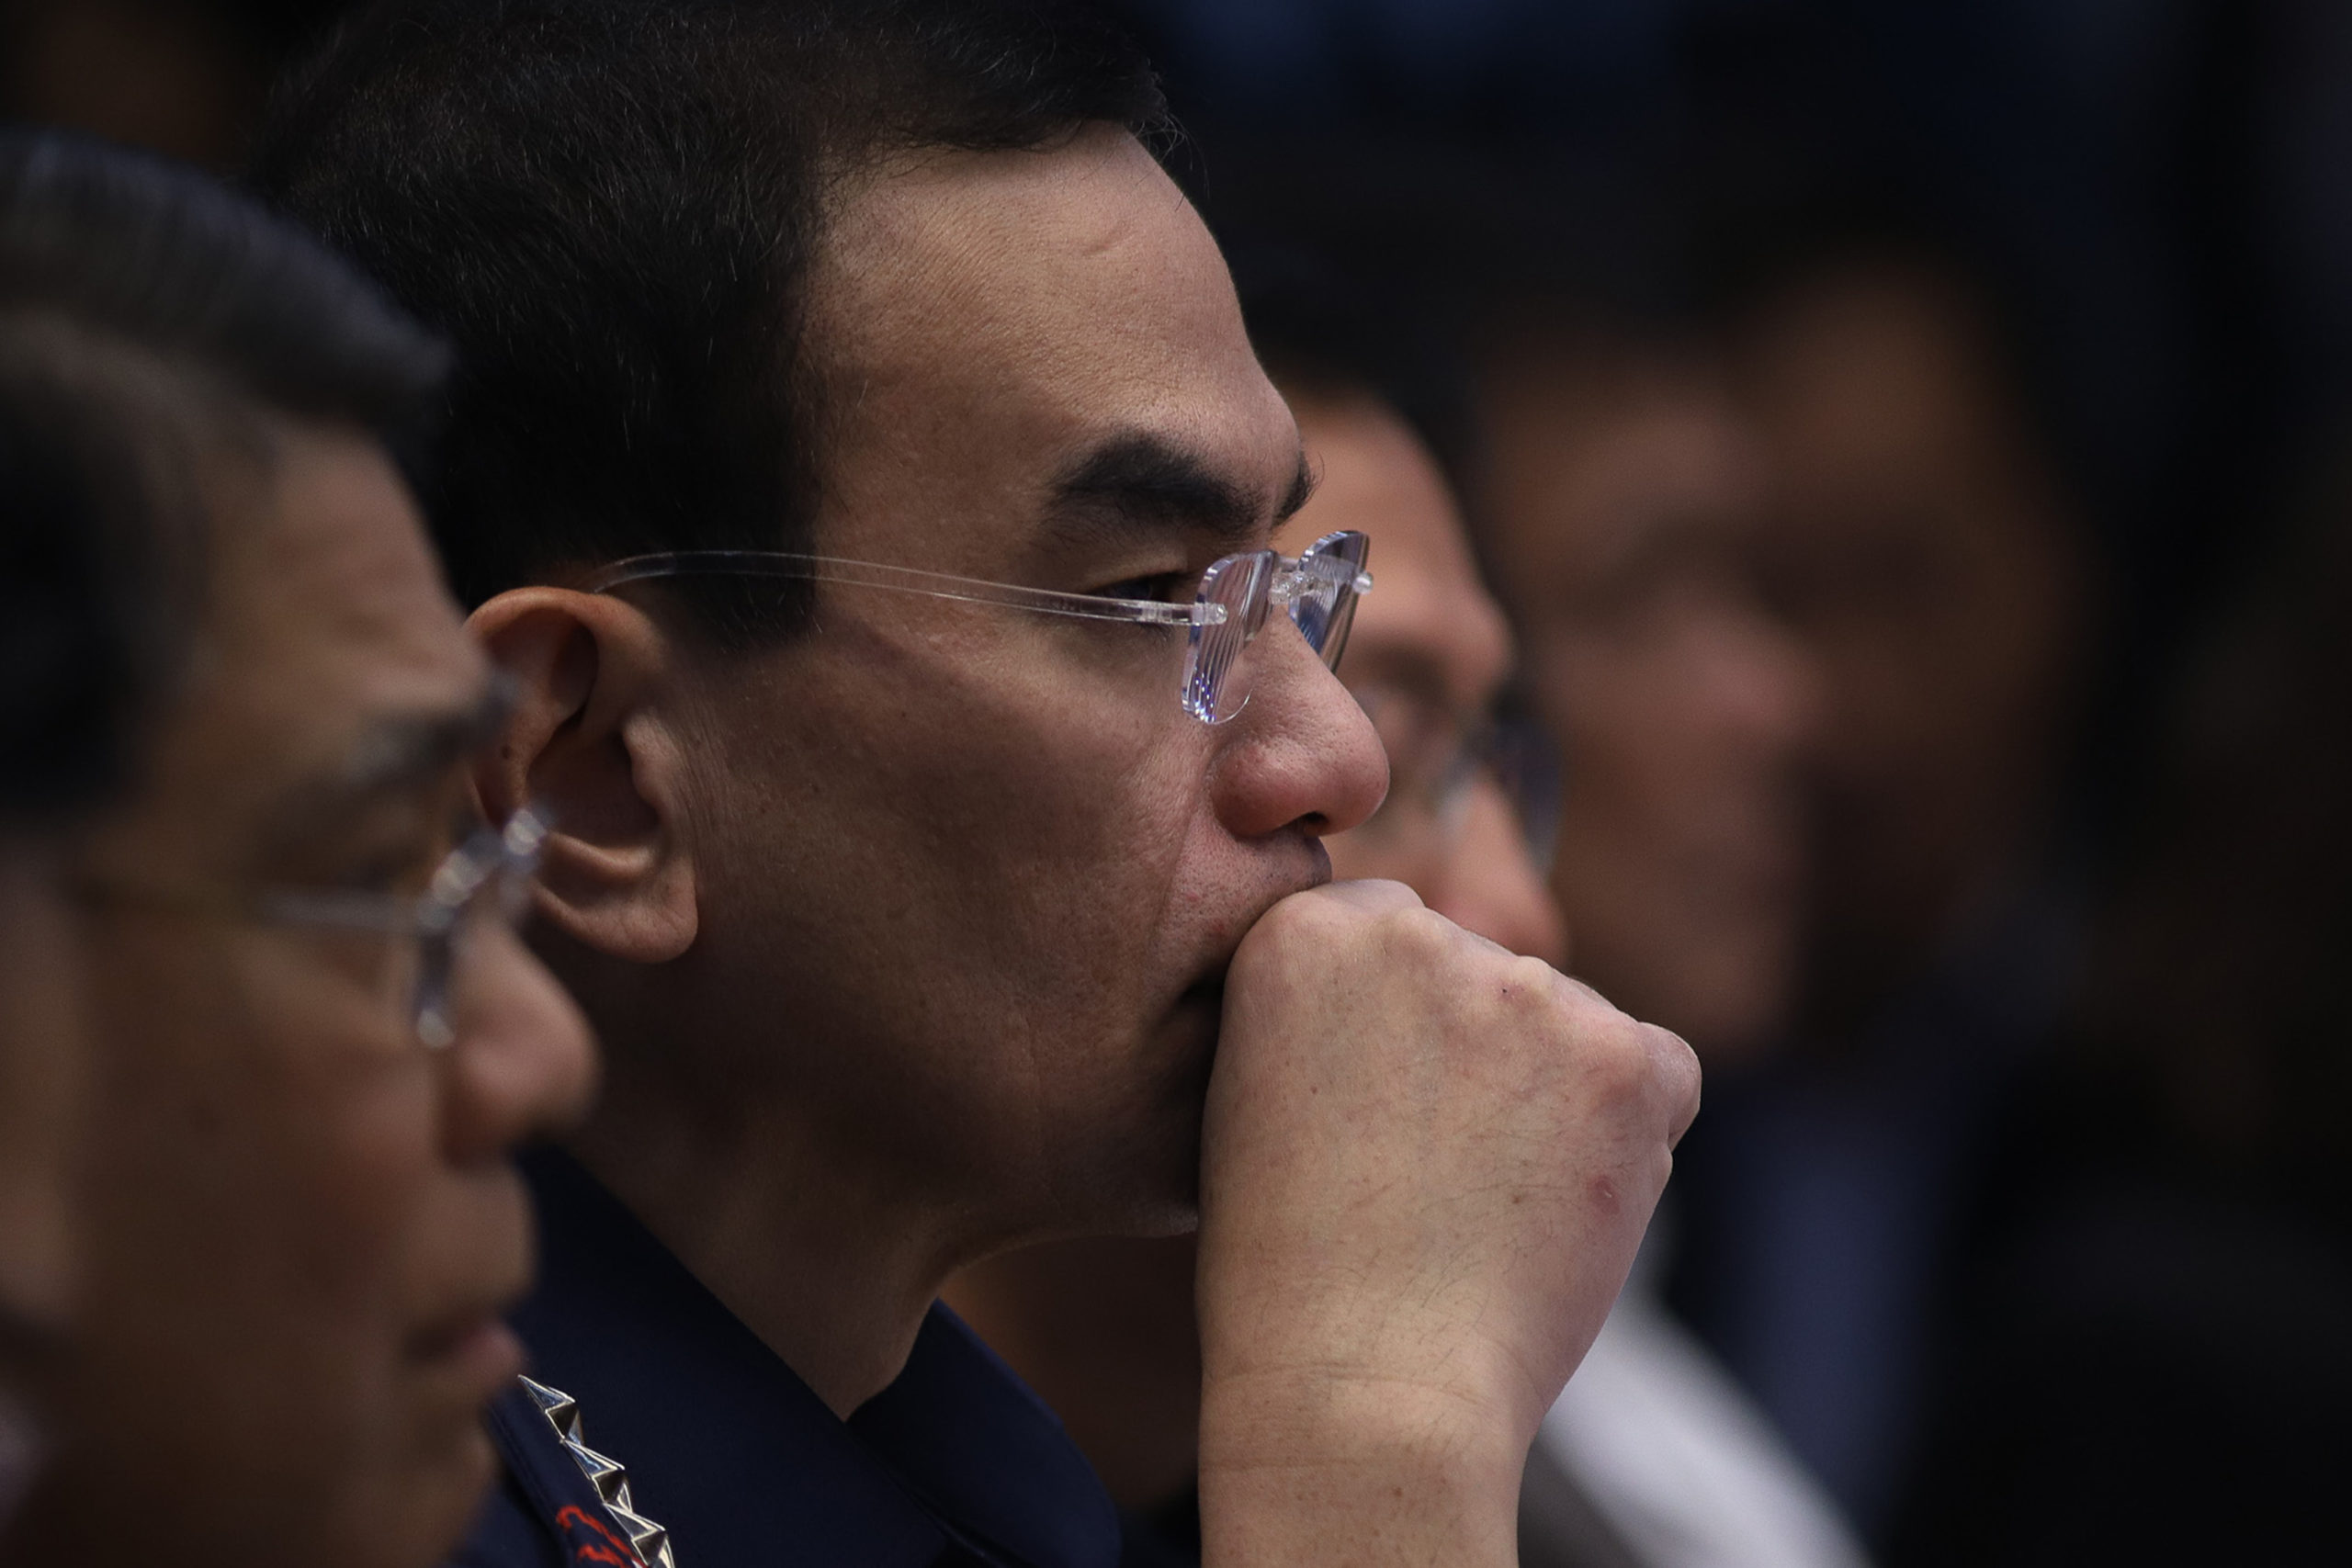 POGO-related crimes: Philippine National Police (PNP) deputy chief of operations Lt. Gen. Guillermo Eleazar tells senators that there had been 63 casino-related kidnapping cases since 2017, 11 kidnappings related to Philippine Offshore Gaming Operations (POGOs) and an increase of prostitution dens in the past three years due to POGO operations. He shared this information to the Senate Blue Ribbon Committee during Thursday’s, March 5, 2020, hearing when asked by Minority Leader Franklin Drilon to confirm reports the rising POGO-related crimes taking place in the country. PRIB Photo